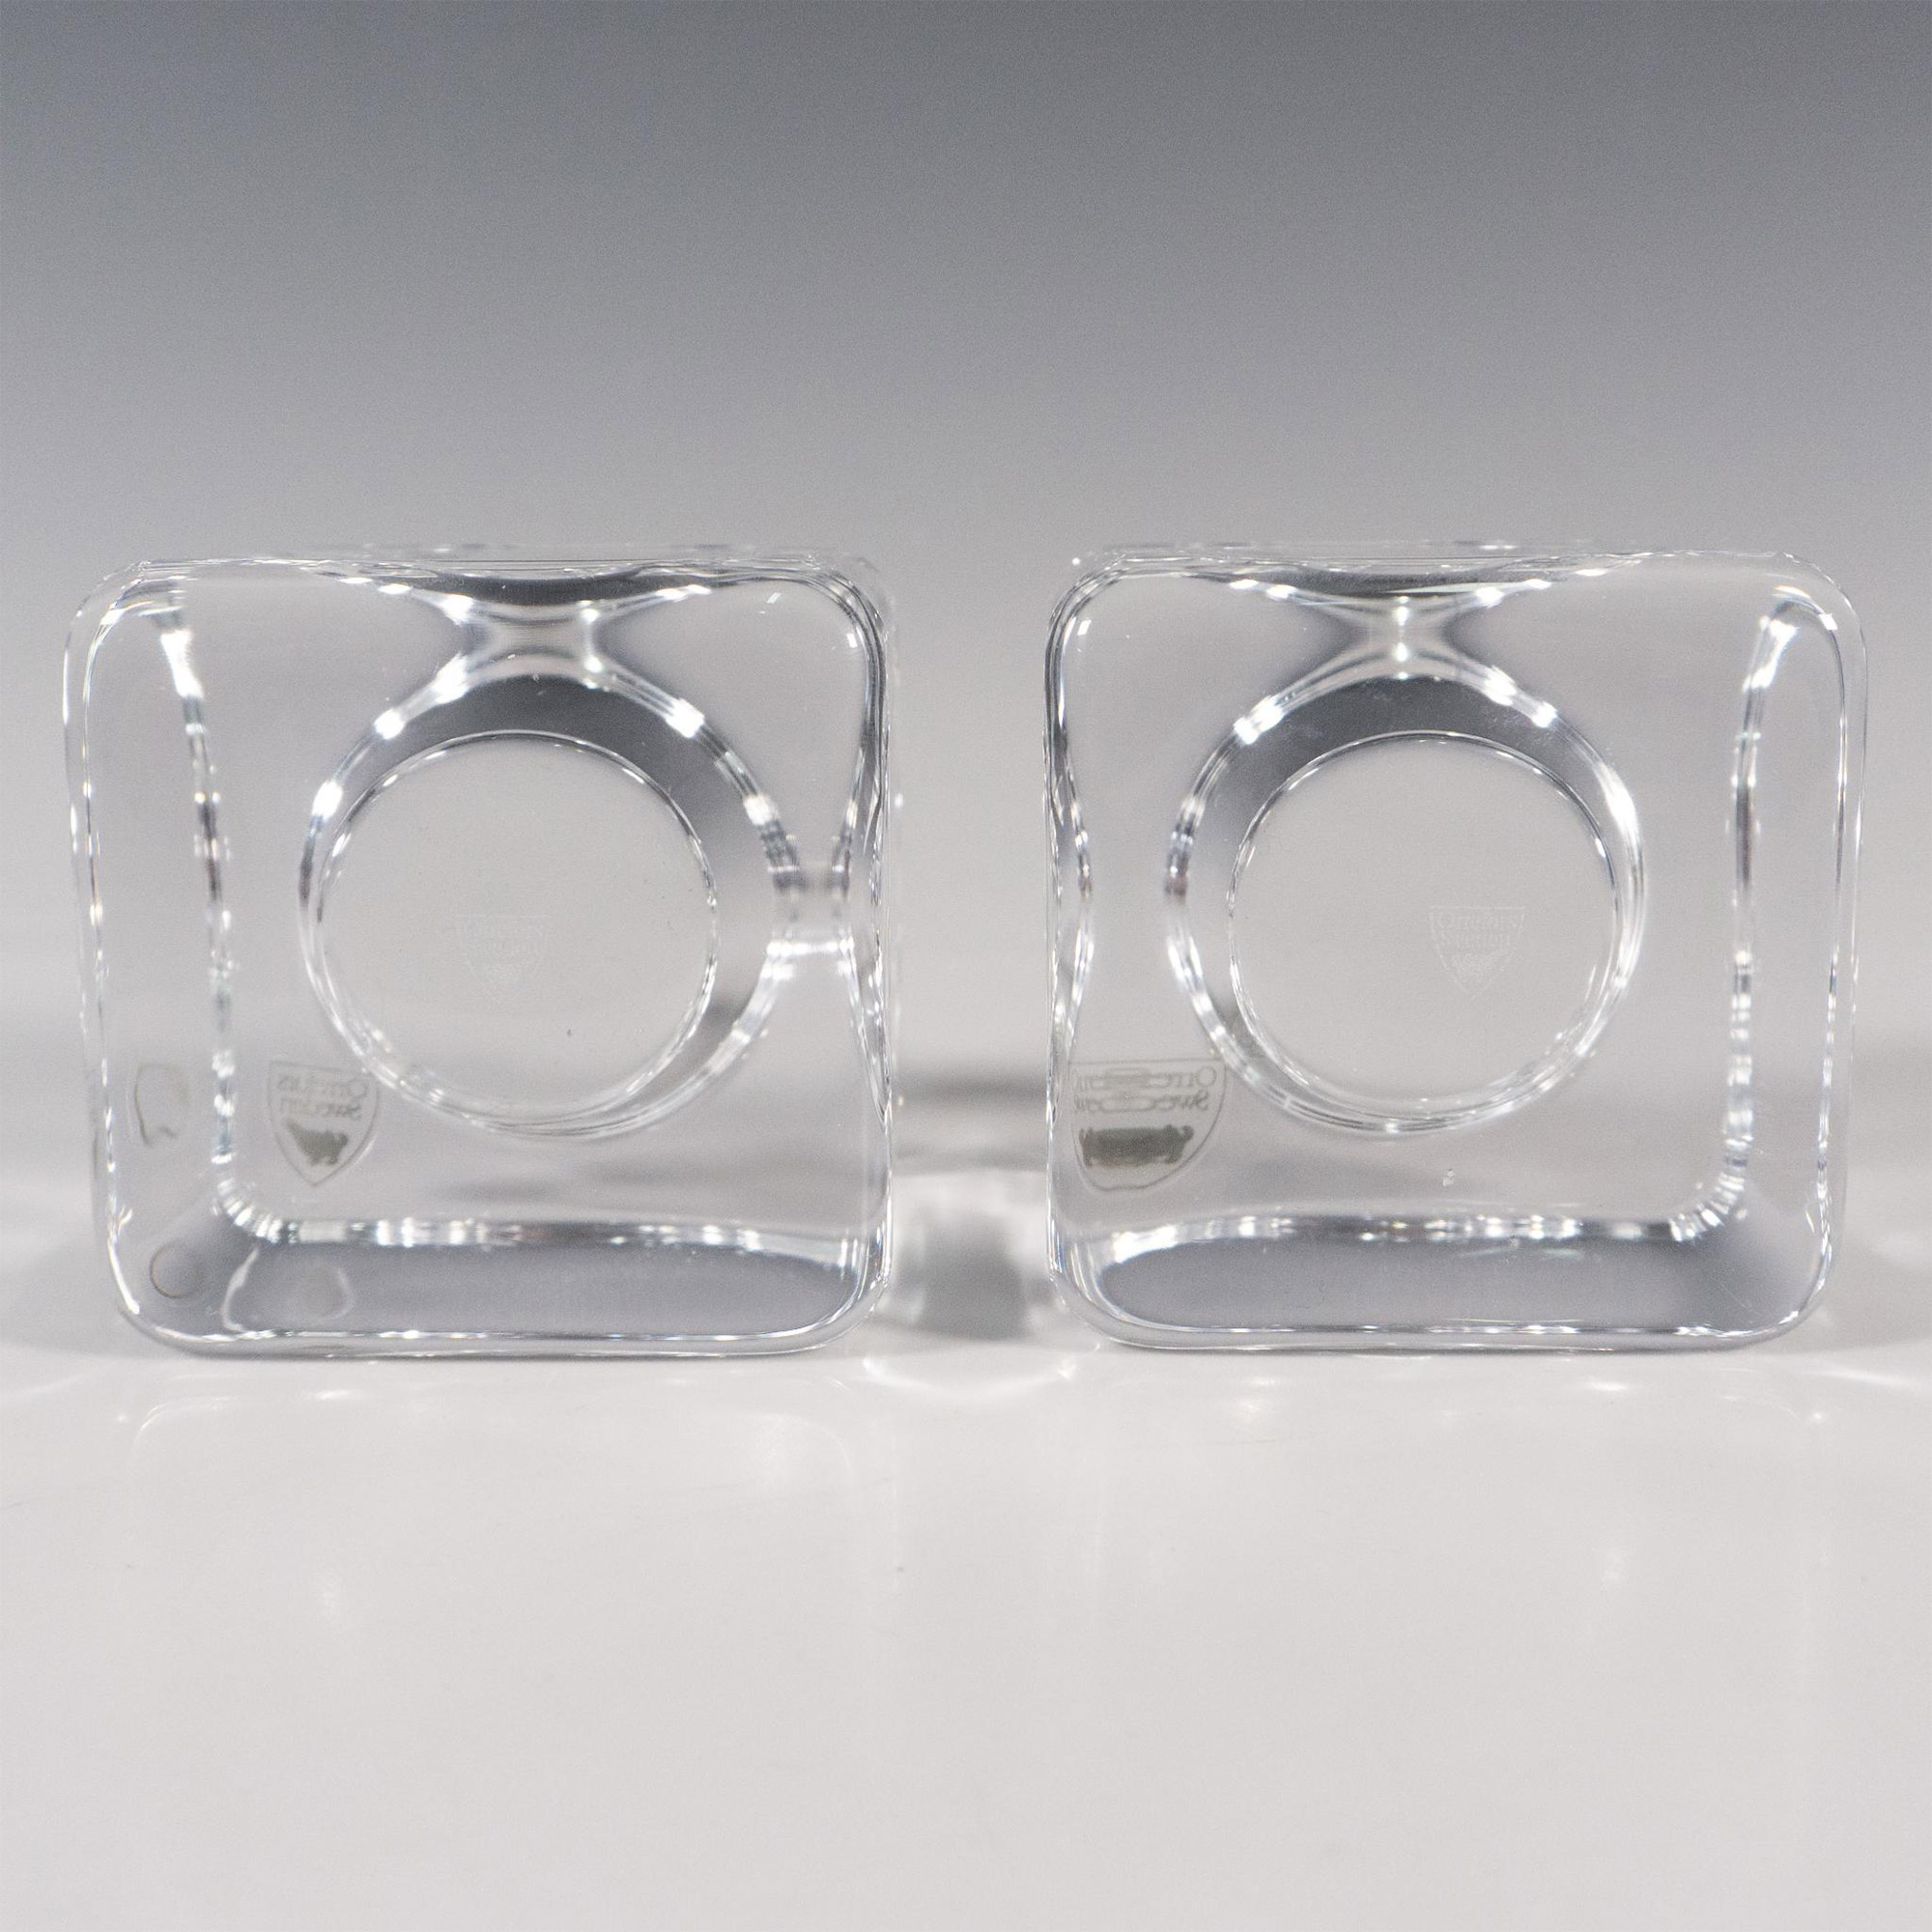 Pair of Orrefors by Goran Warff Candle Holders, Ice Cube - Image 3 of 3